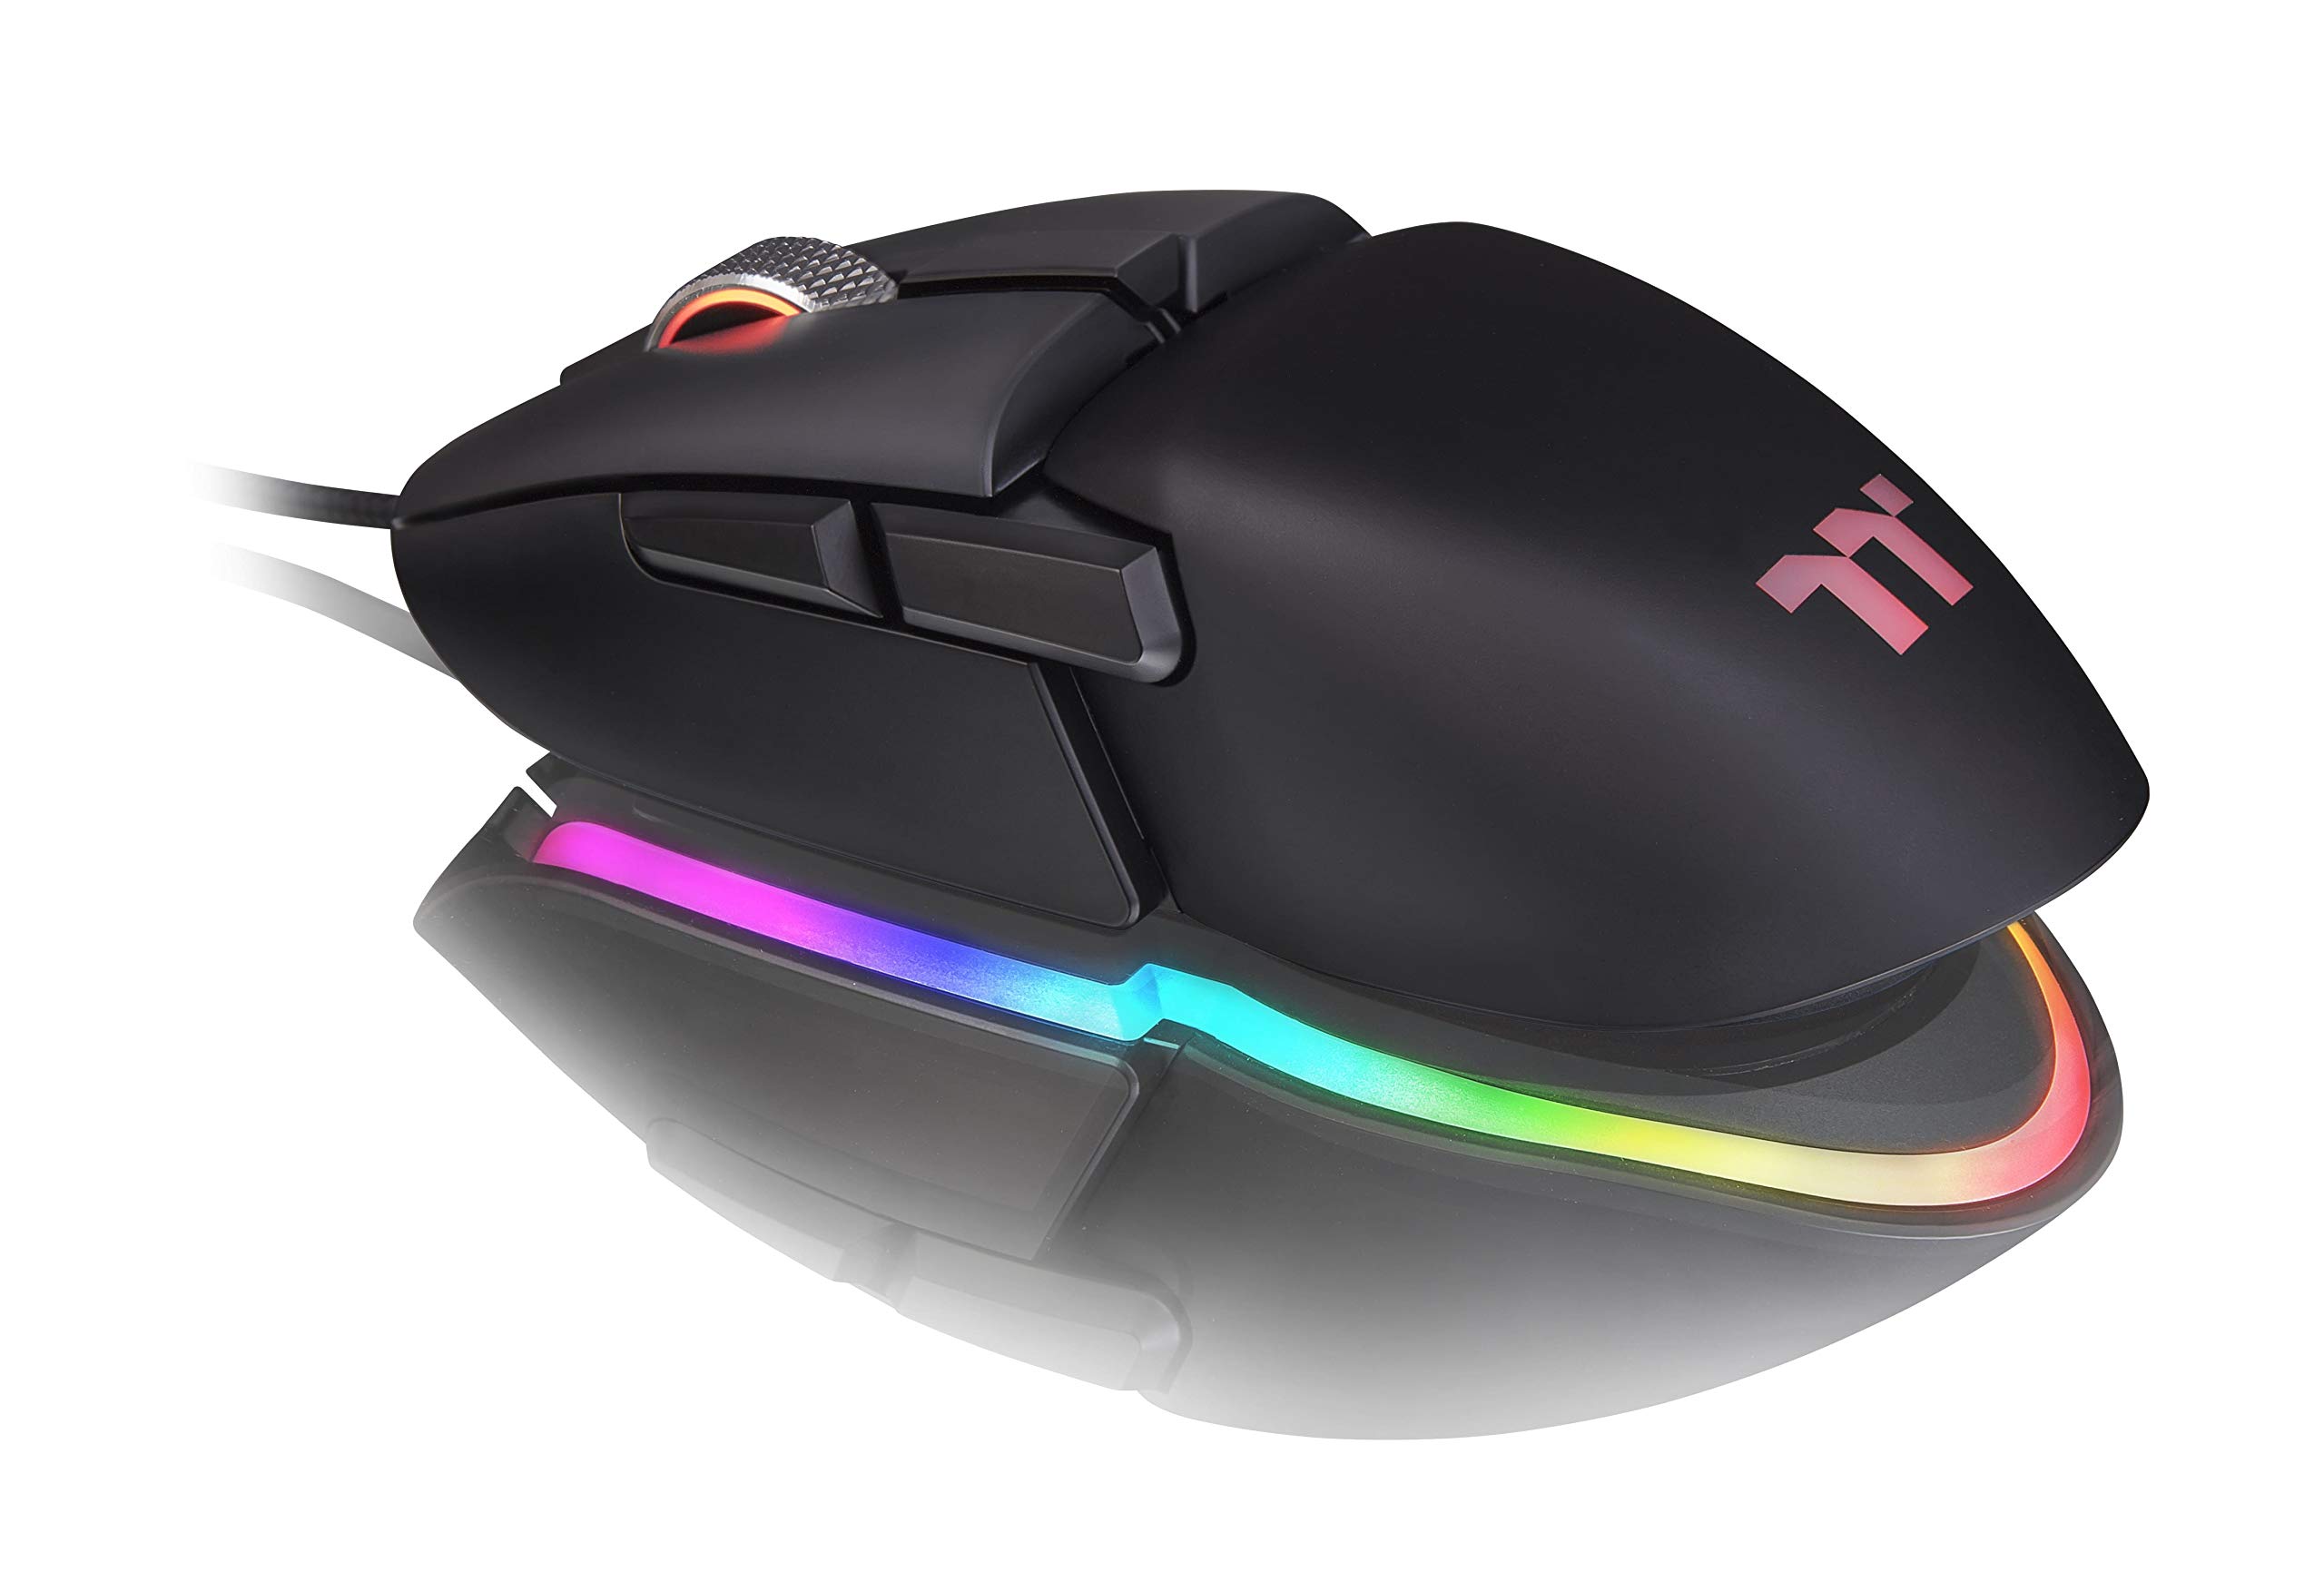 Thermaltake Argent M5 RGB Gaming Mouse